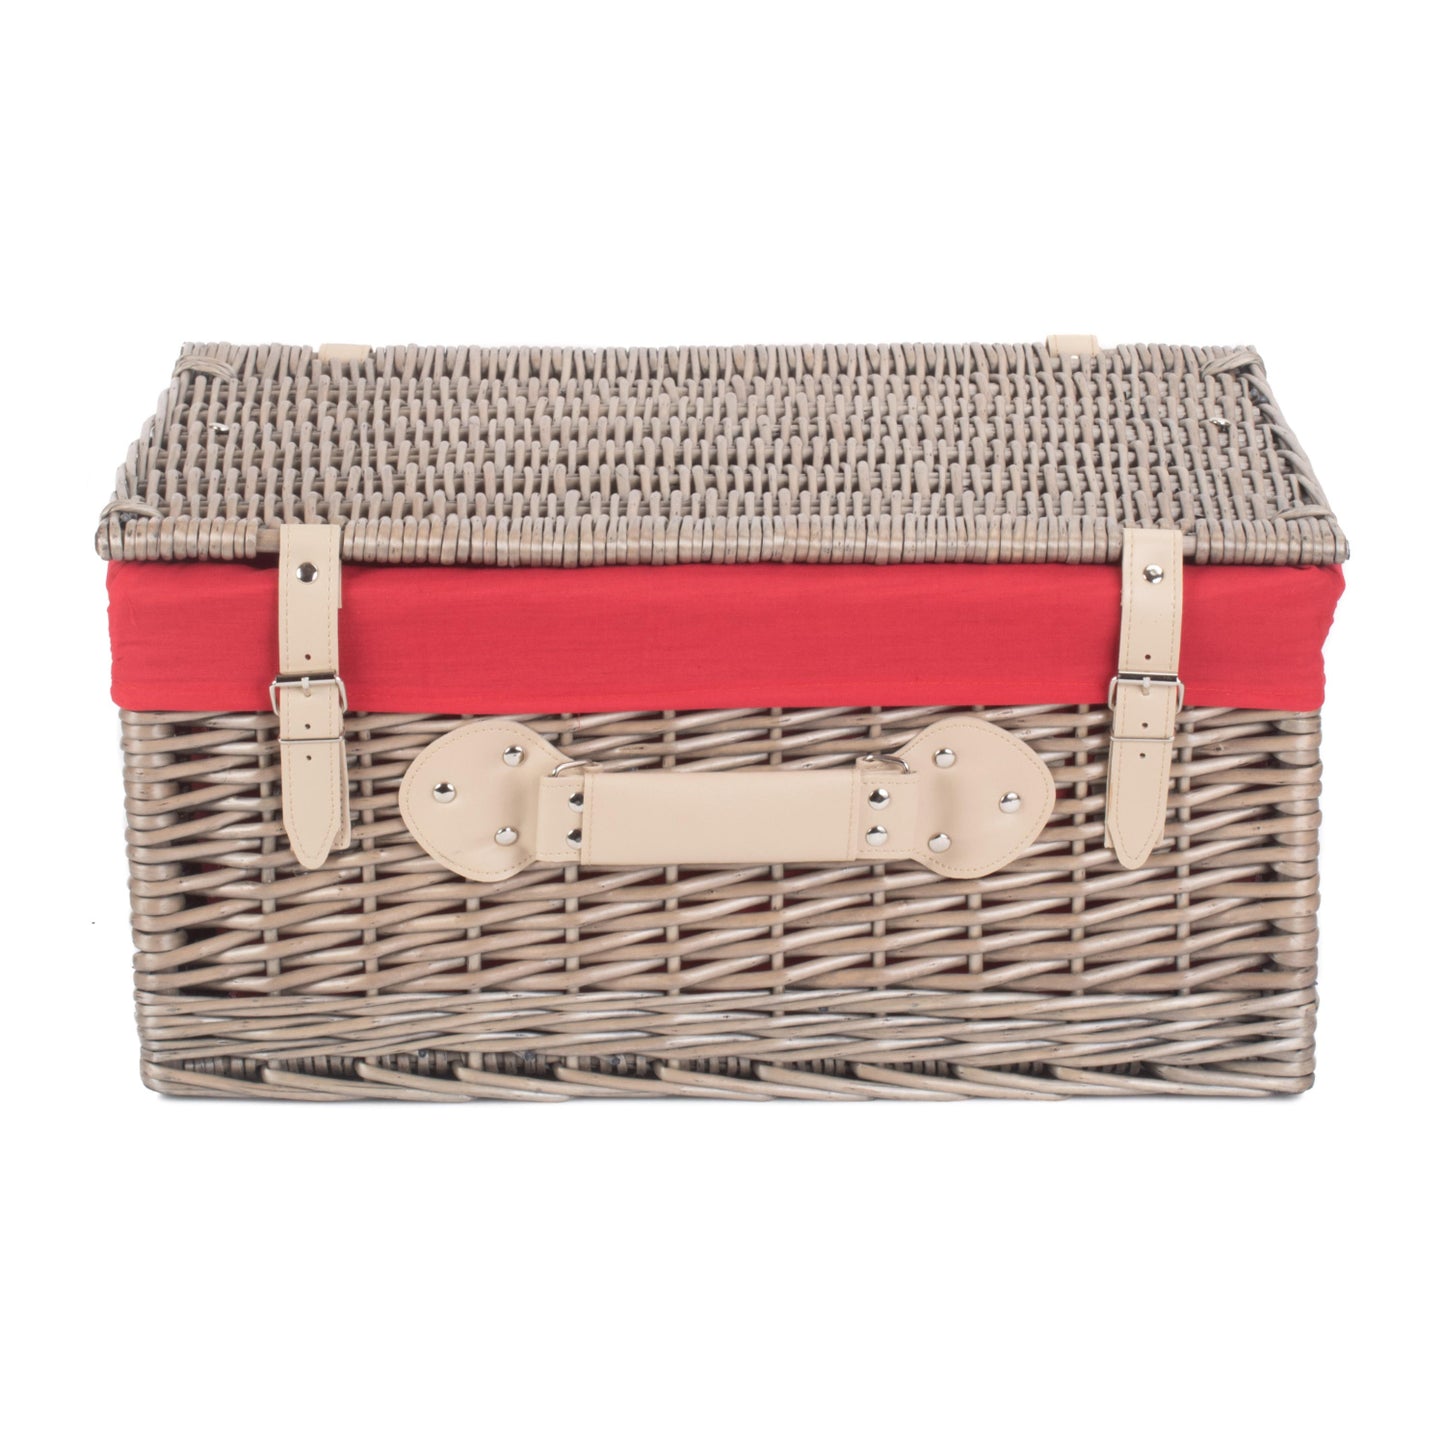 20 Inch Antique Wash Hamper With Red Lining